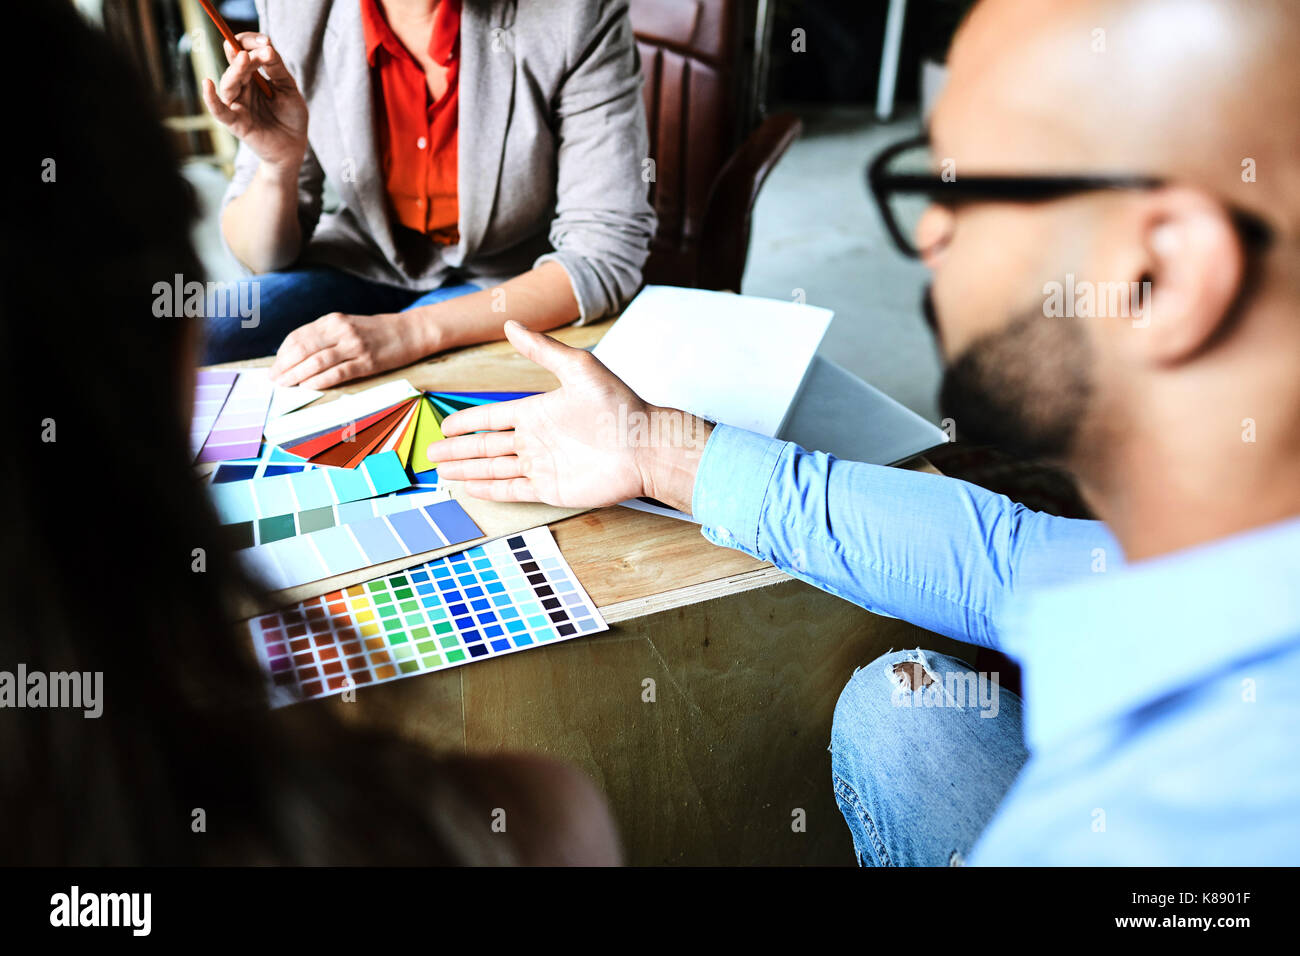 One of designers pointing at variety of colors in palette while consulting with colleagues Stock Photo